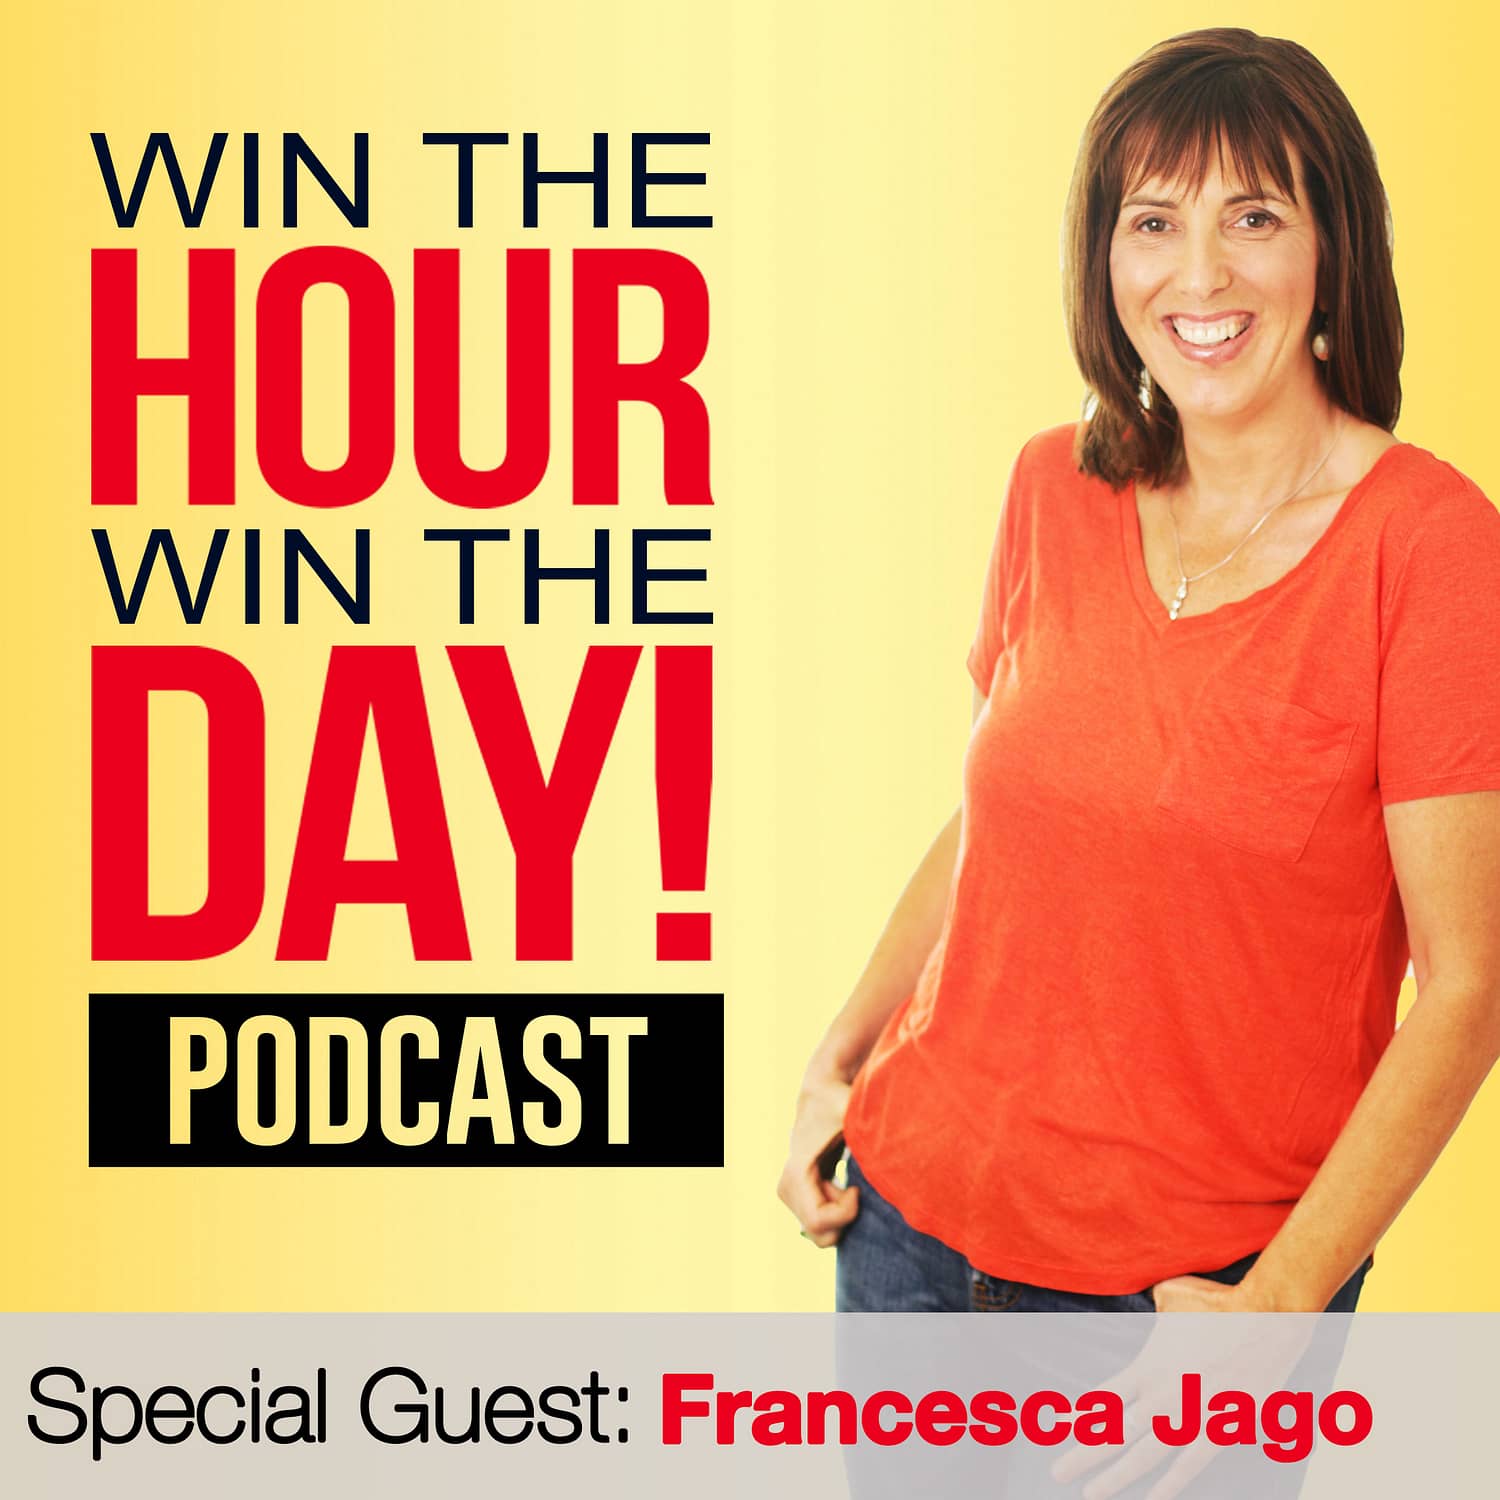 How To Make Videos That Showcase You! With Francesca Jago